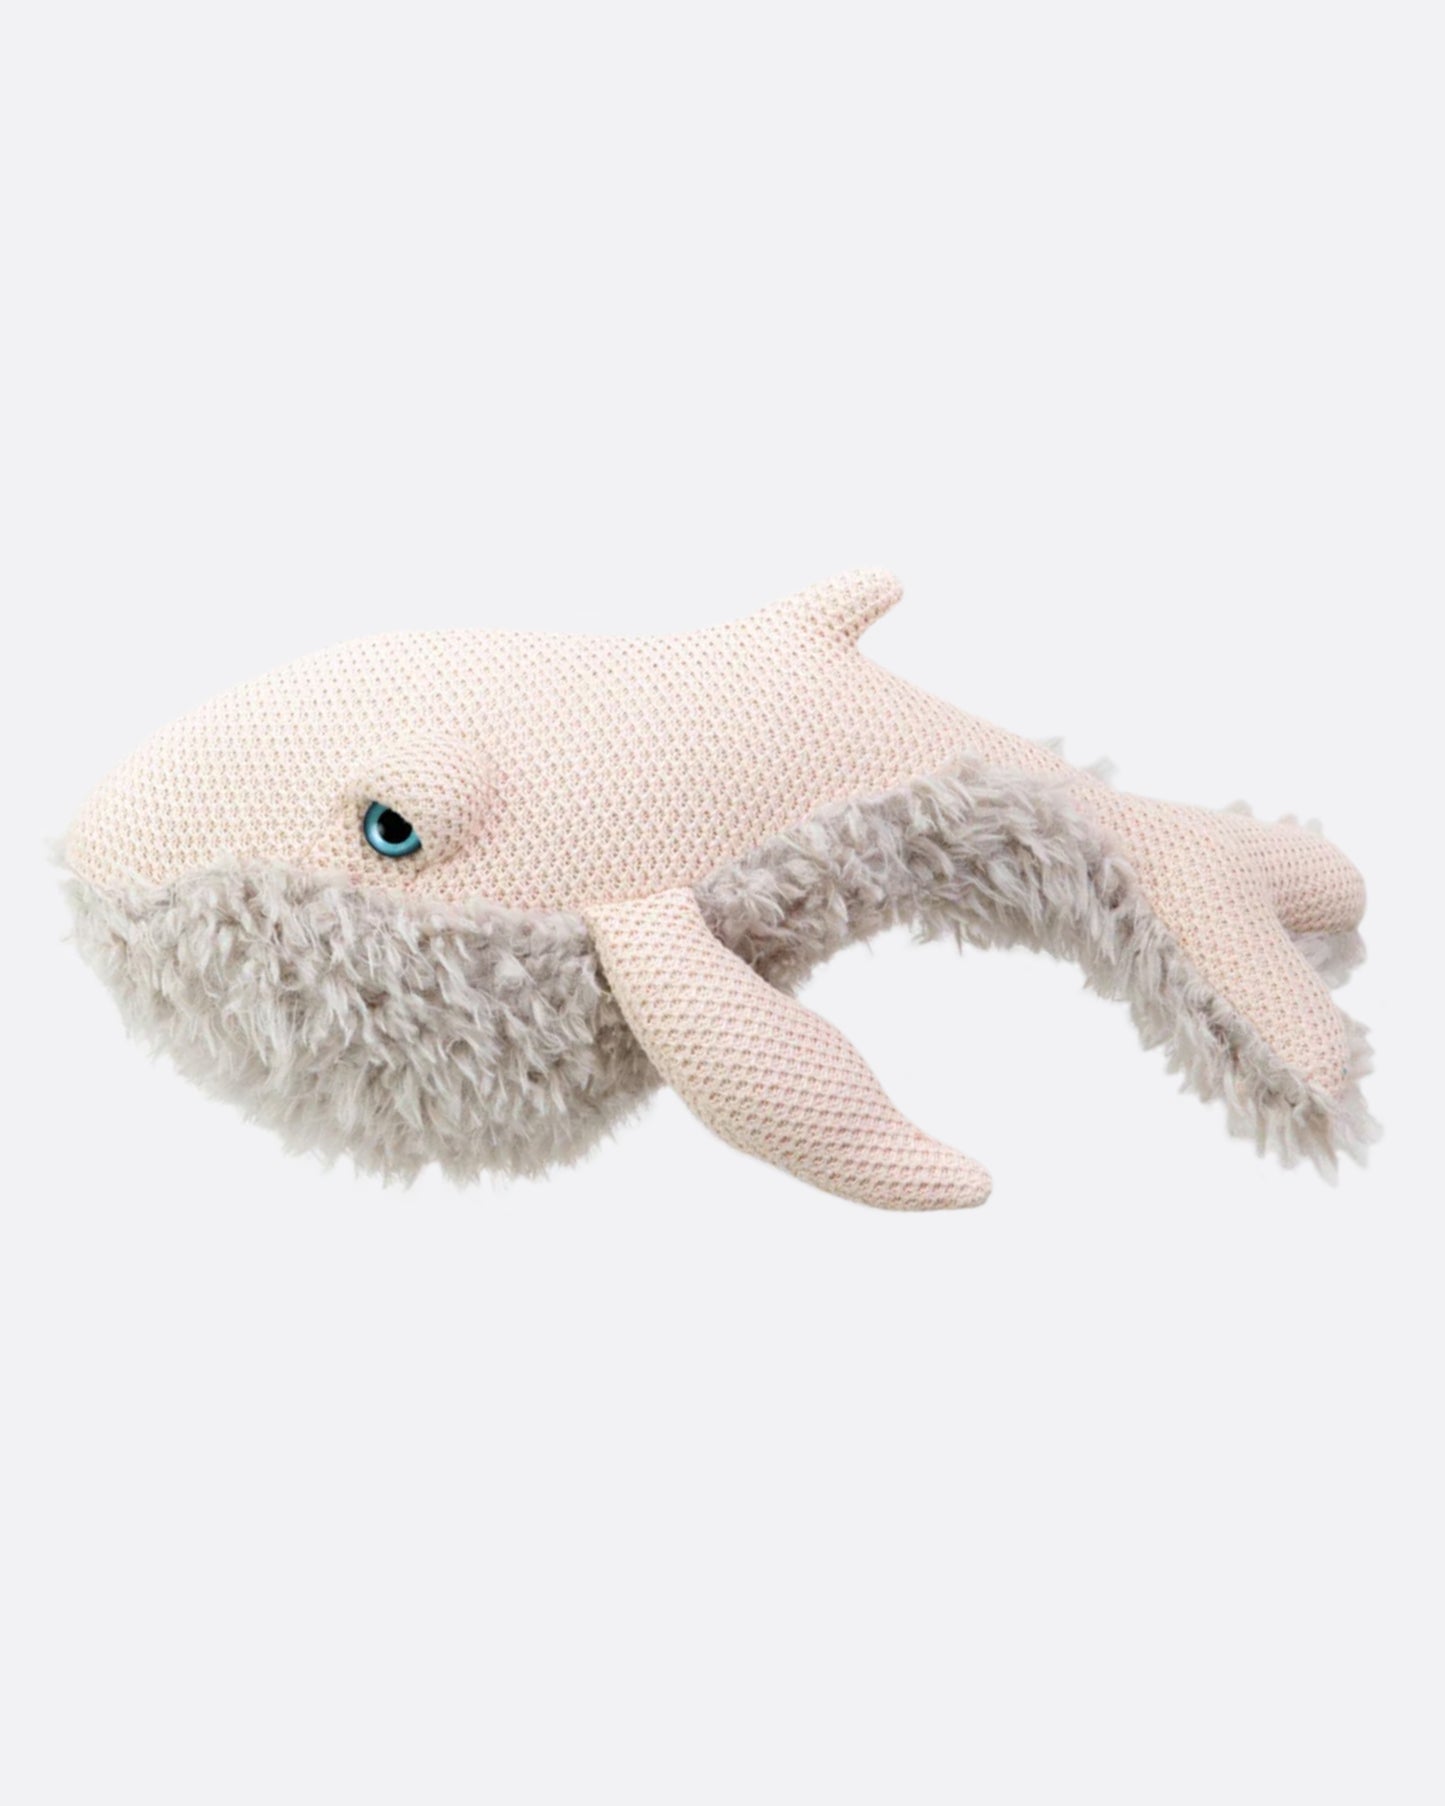 Handmade pink whale, waiting for you to take them on an adventure.